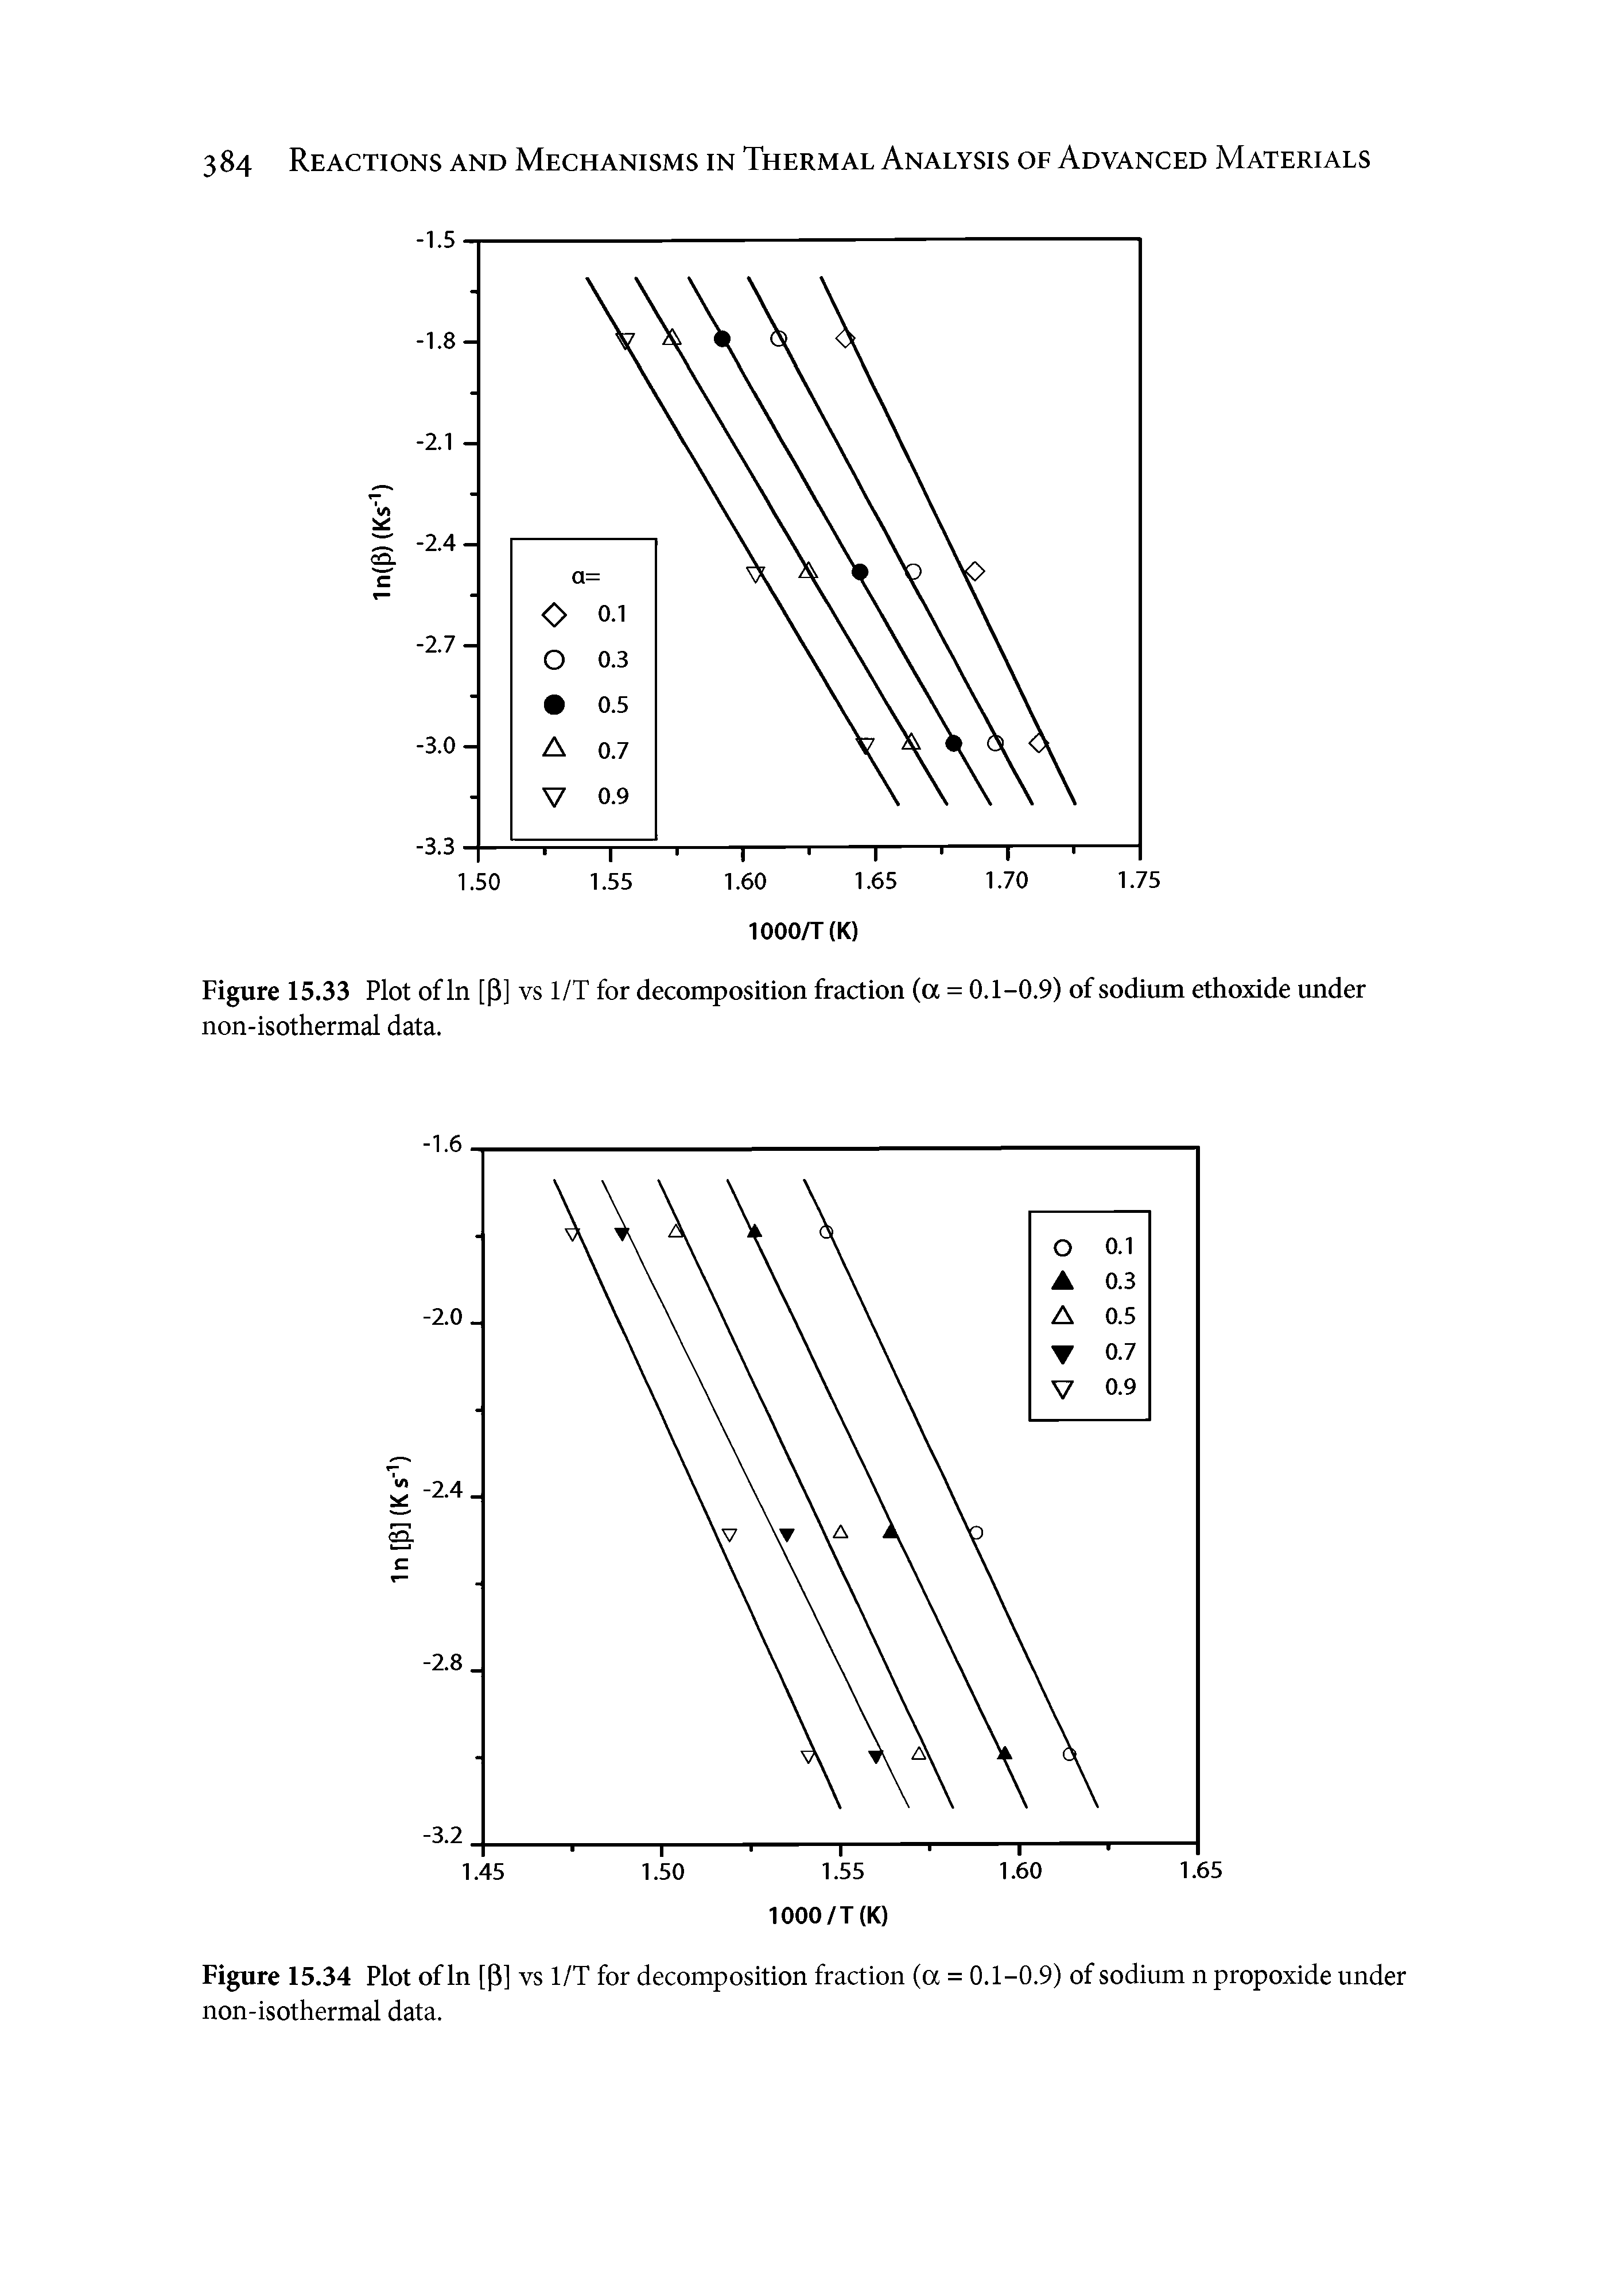 Figure 15.34 Plot of In [P] vs 1/T for decomposition fraction (a = 0.1-0.9) of sodium n propoxide under non-isothermal data.